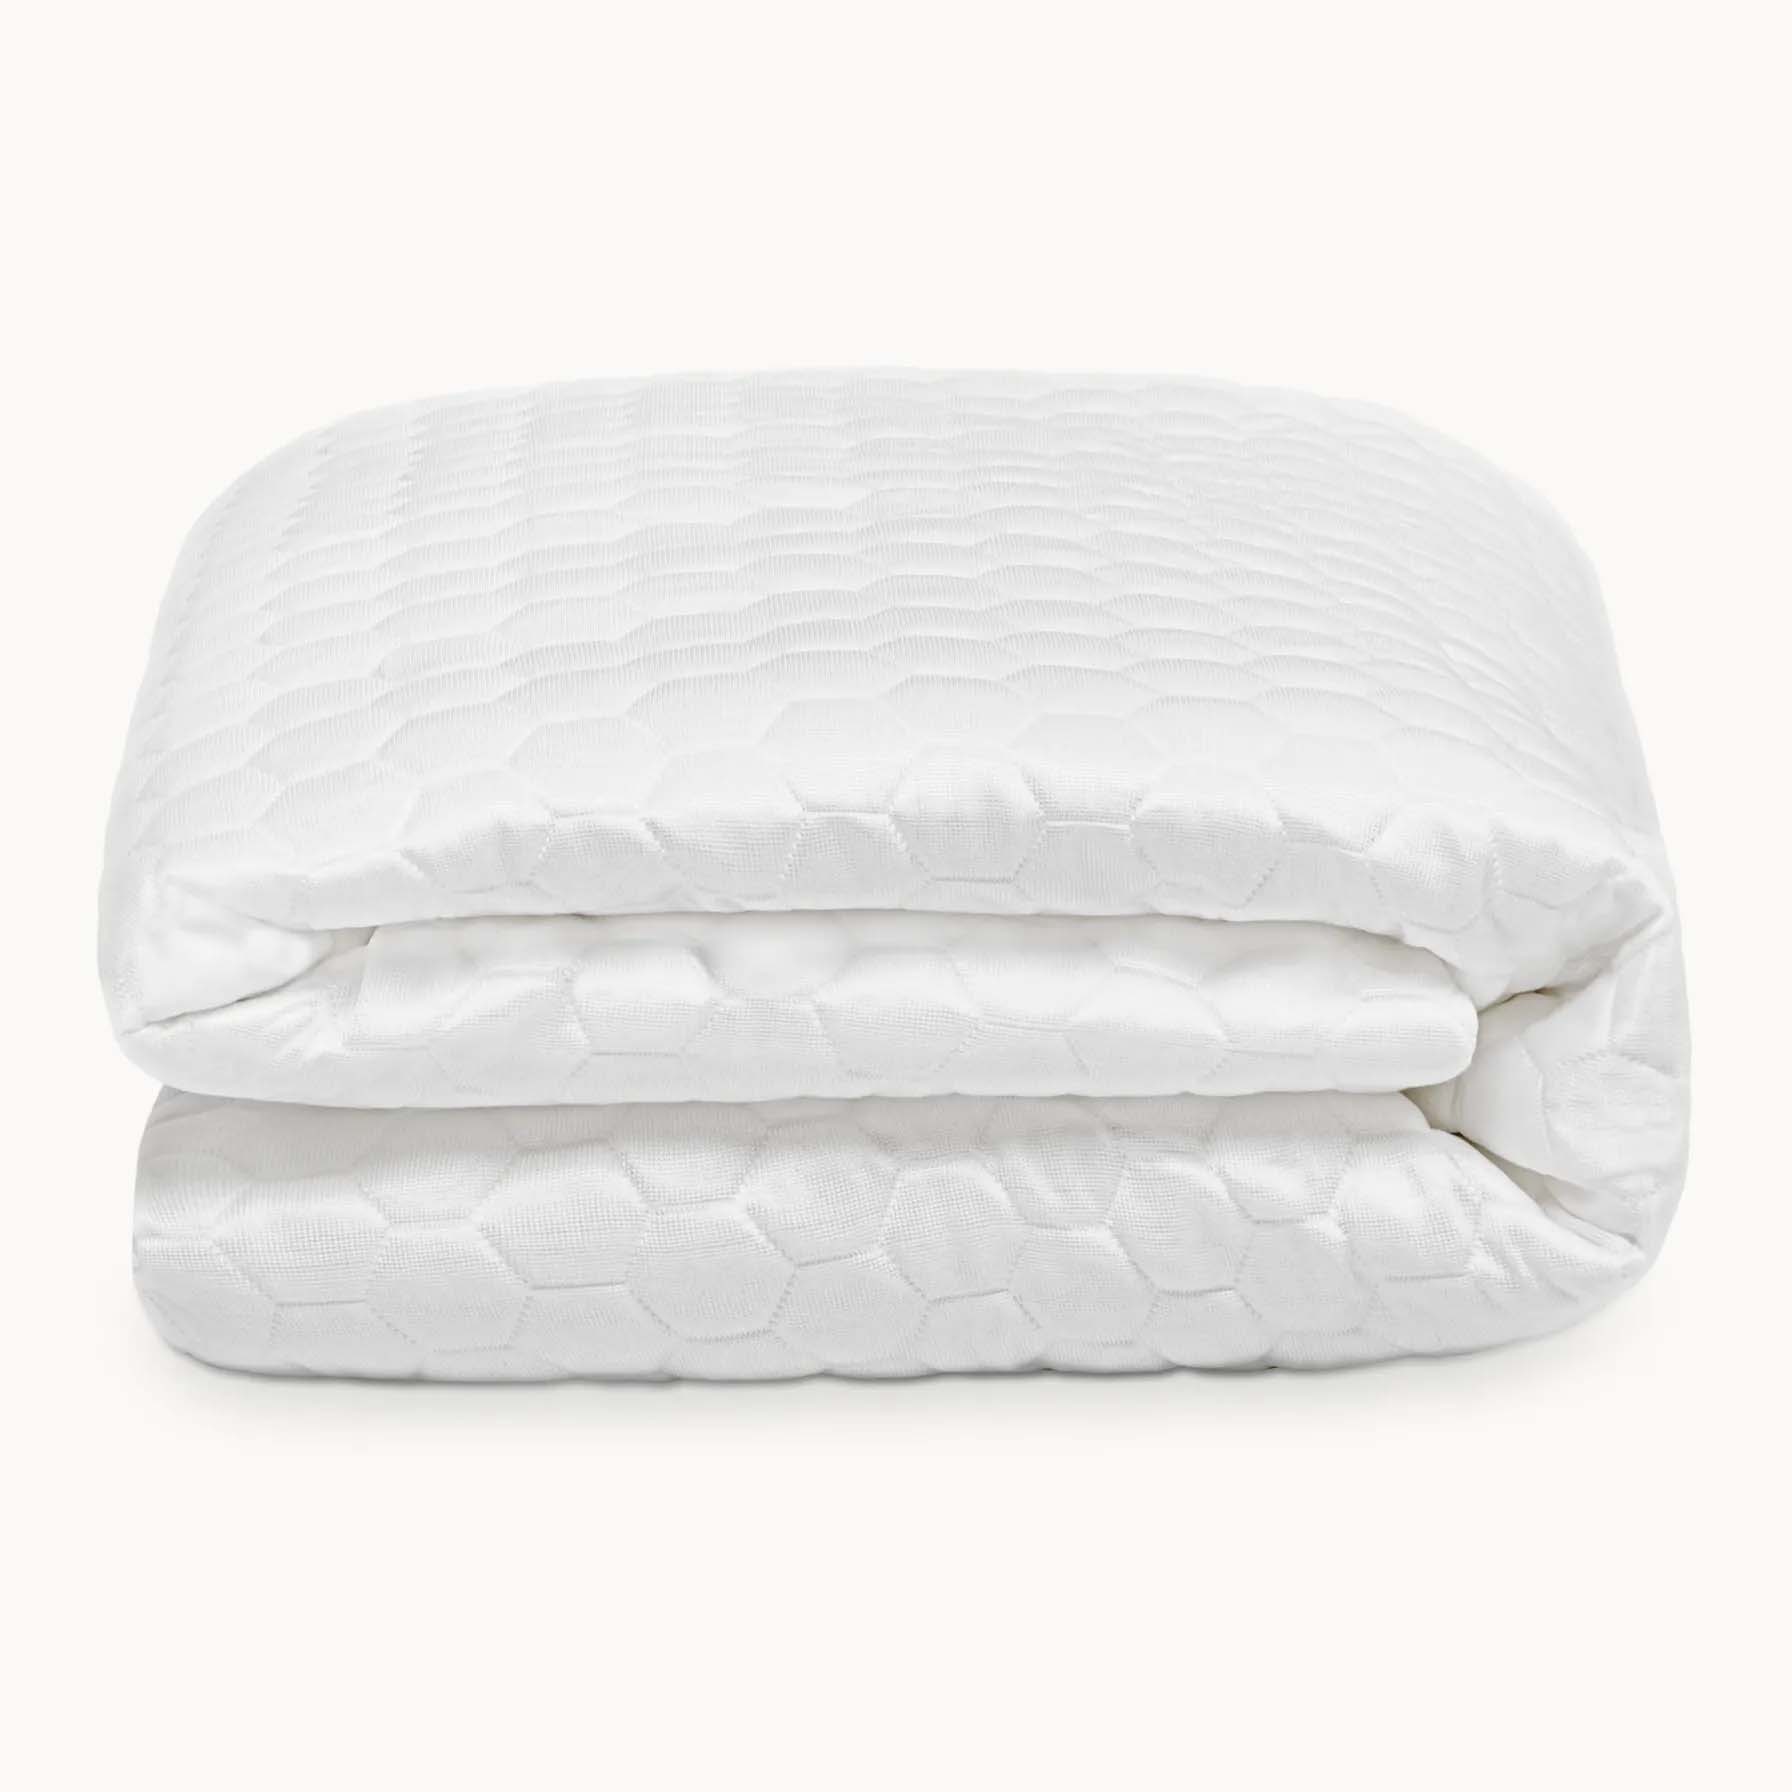 Leesa Ultra Cool Mattress Protector with quilted design